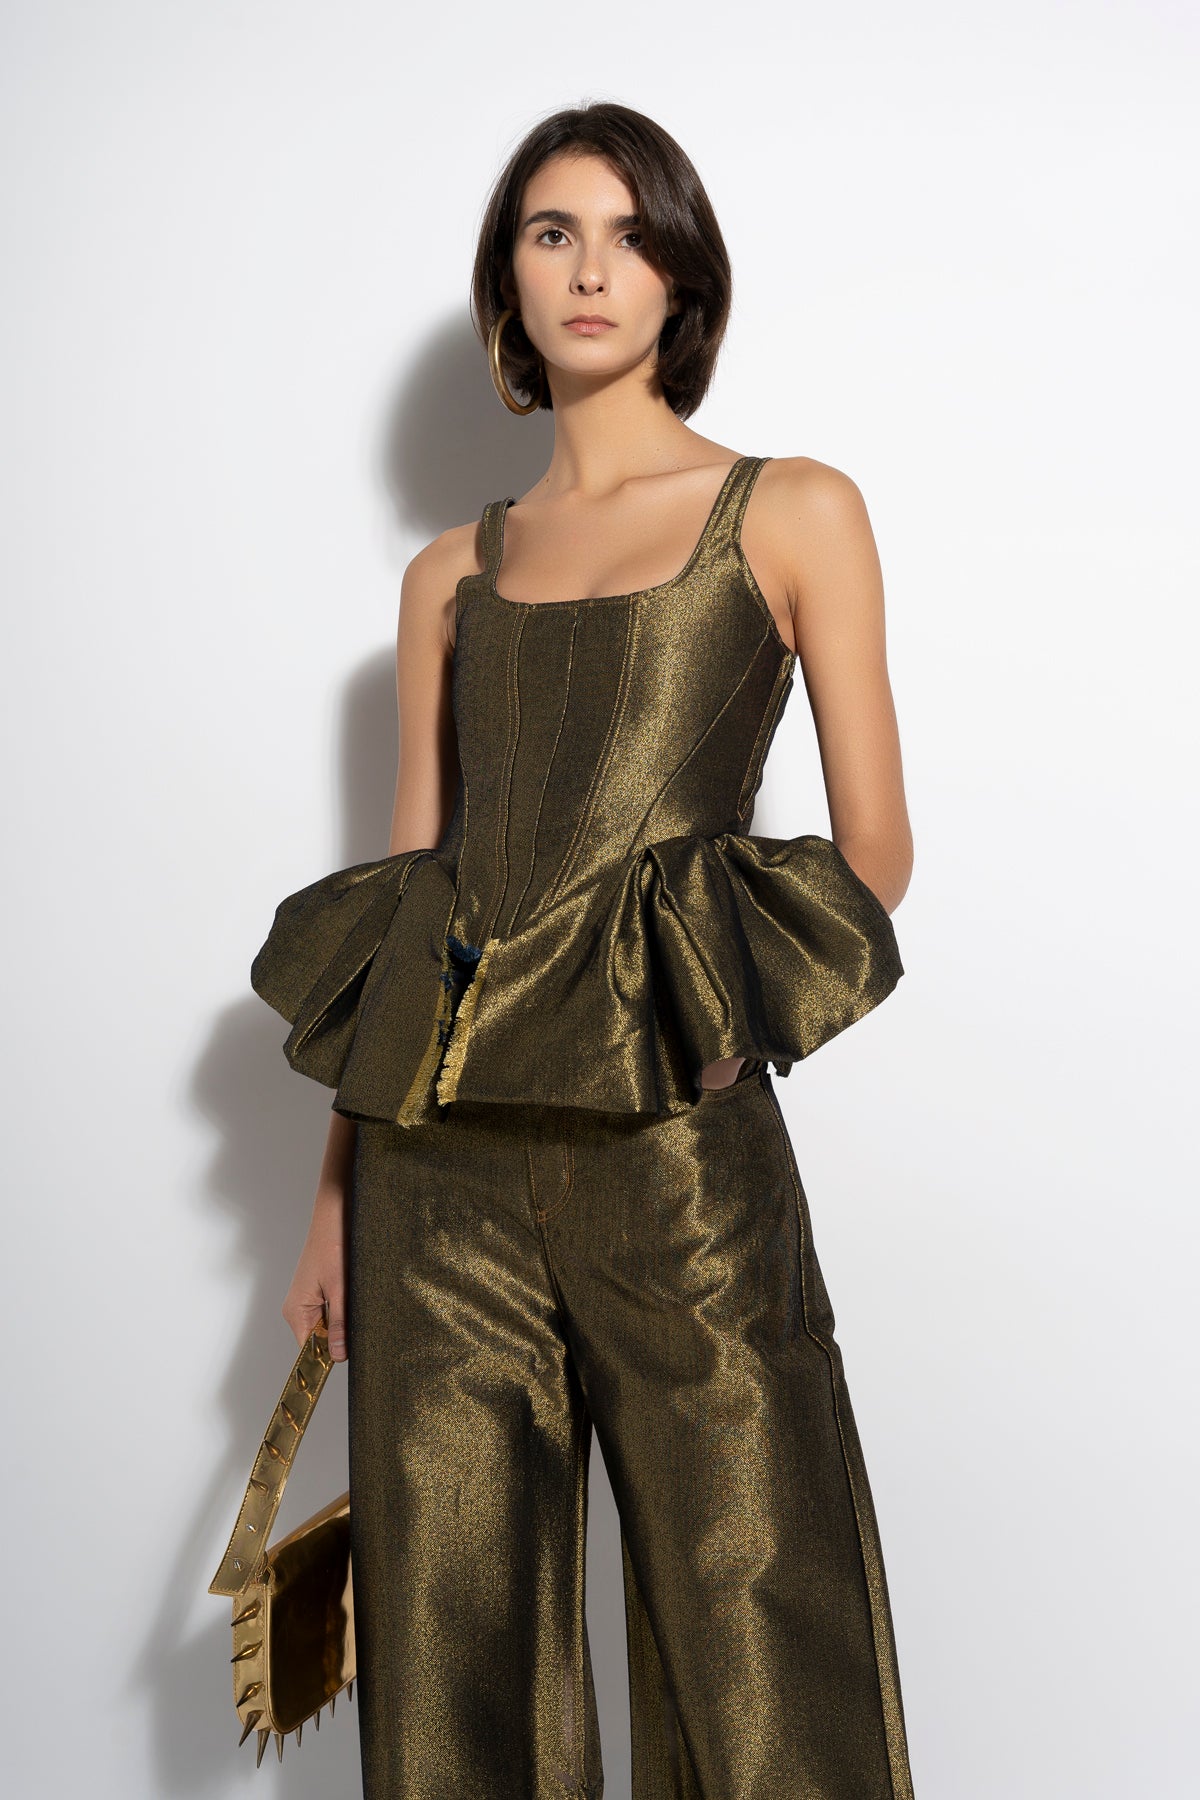 GOLD LUREX FITTED CORSET marques almeida